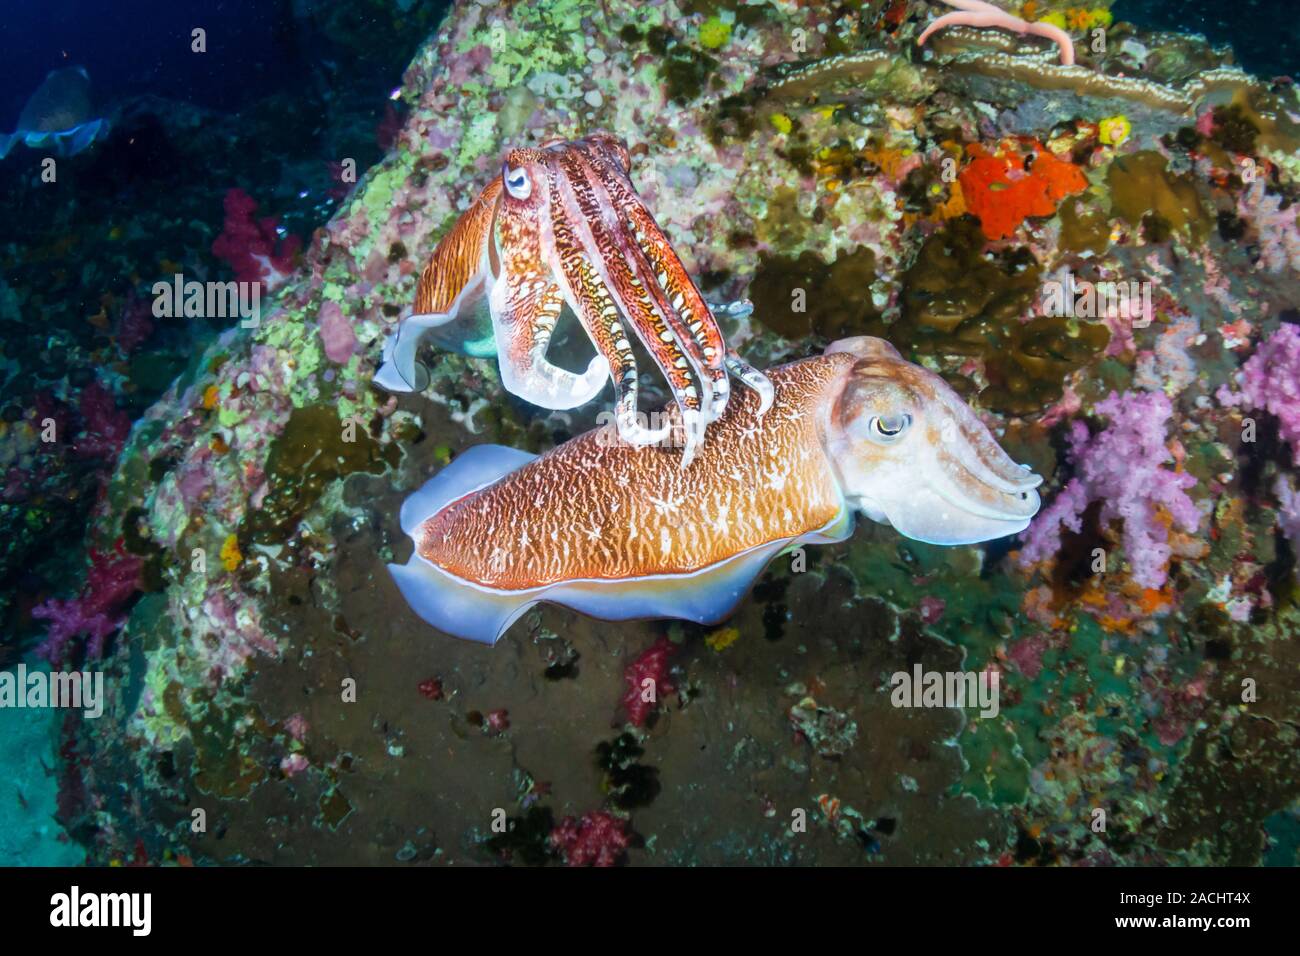 Mating Cuttlefish on a tropical coral reef at dawn (Richelieu Rock, Thailand) Stock Photo